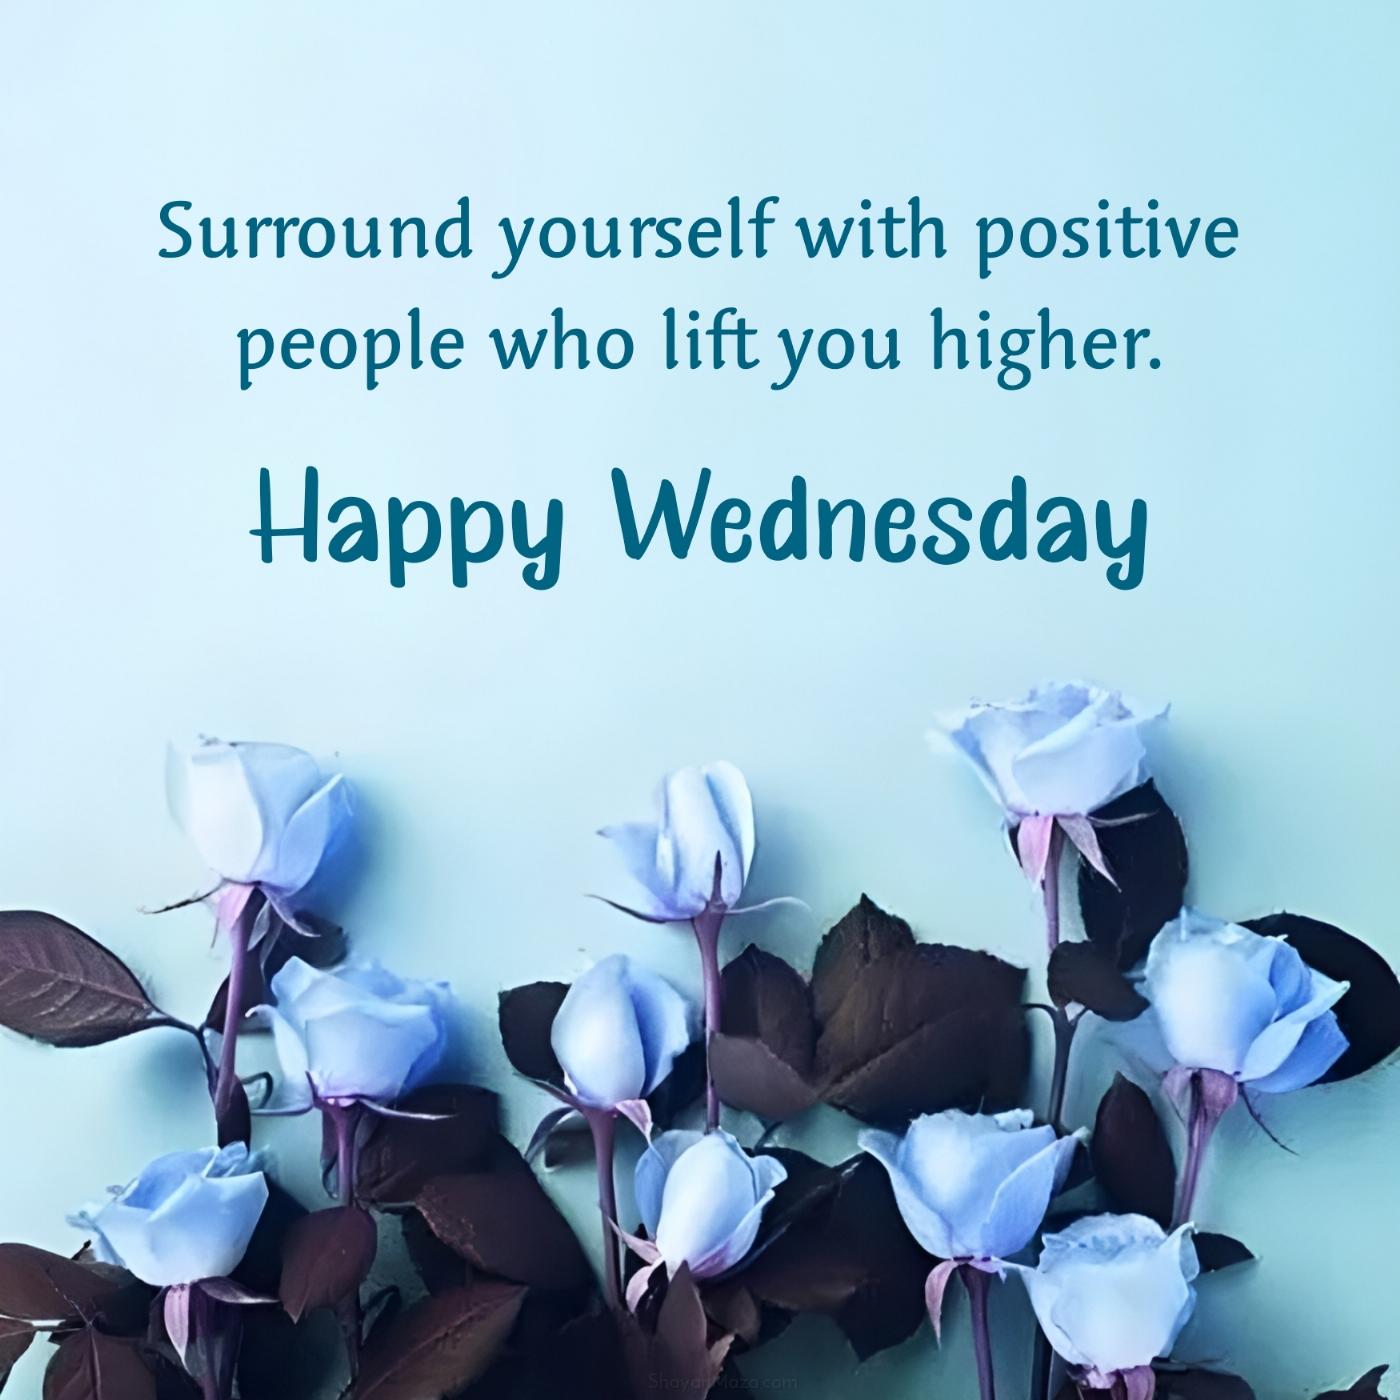 Happy Wednesday! Surround yourself with positive people